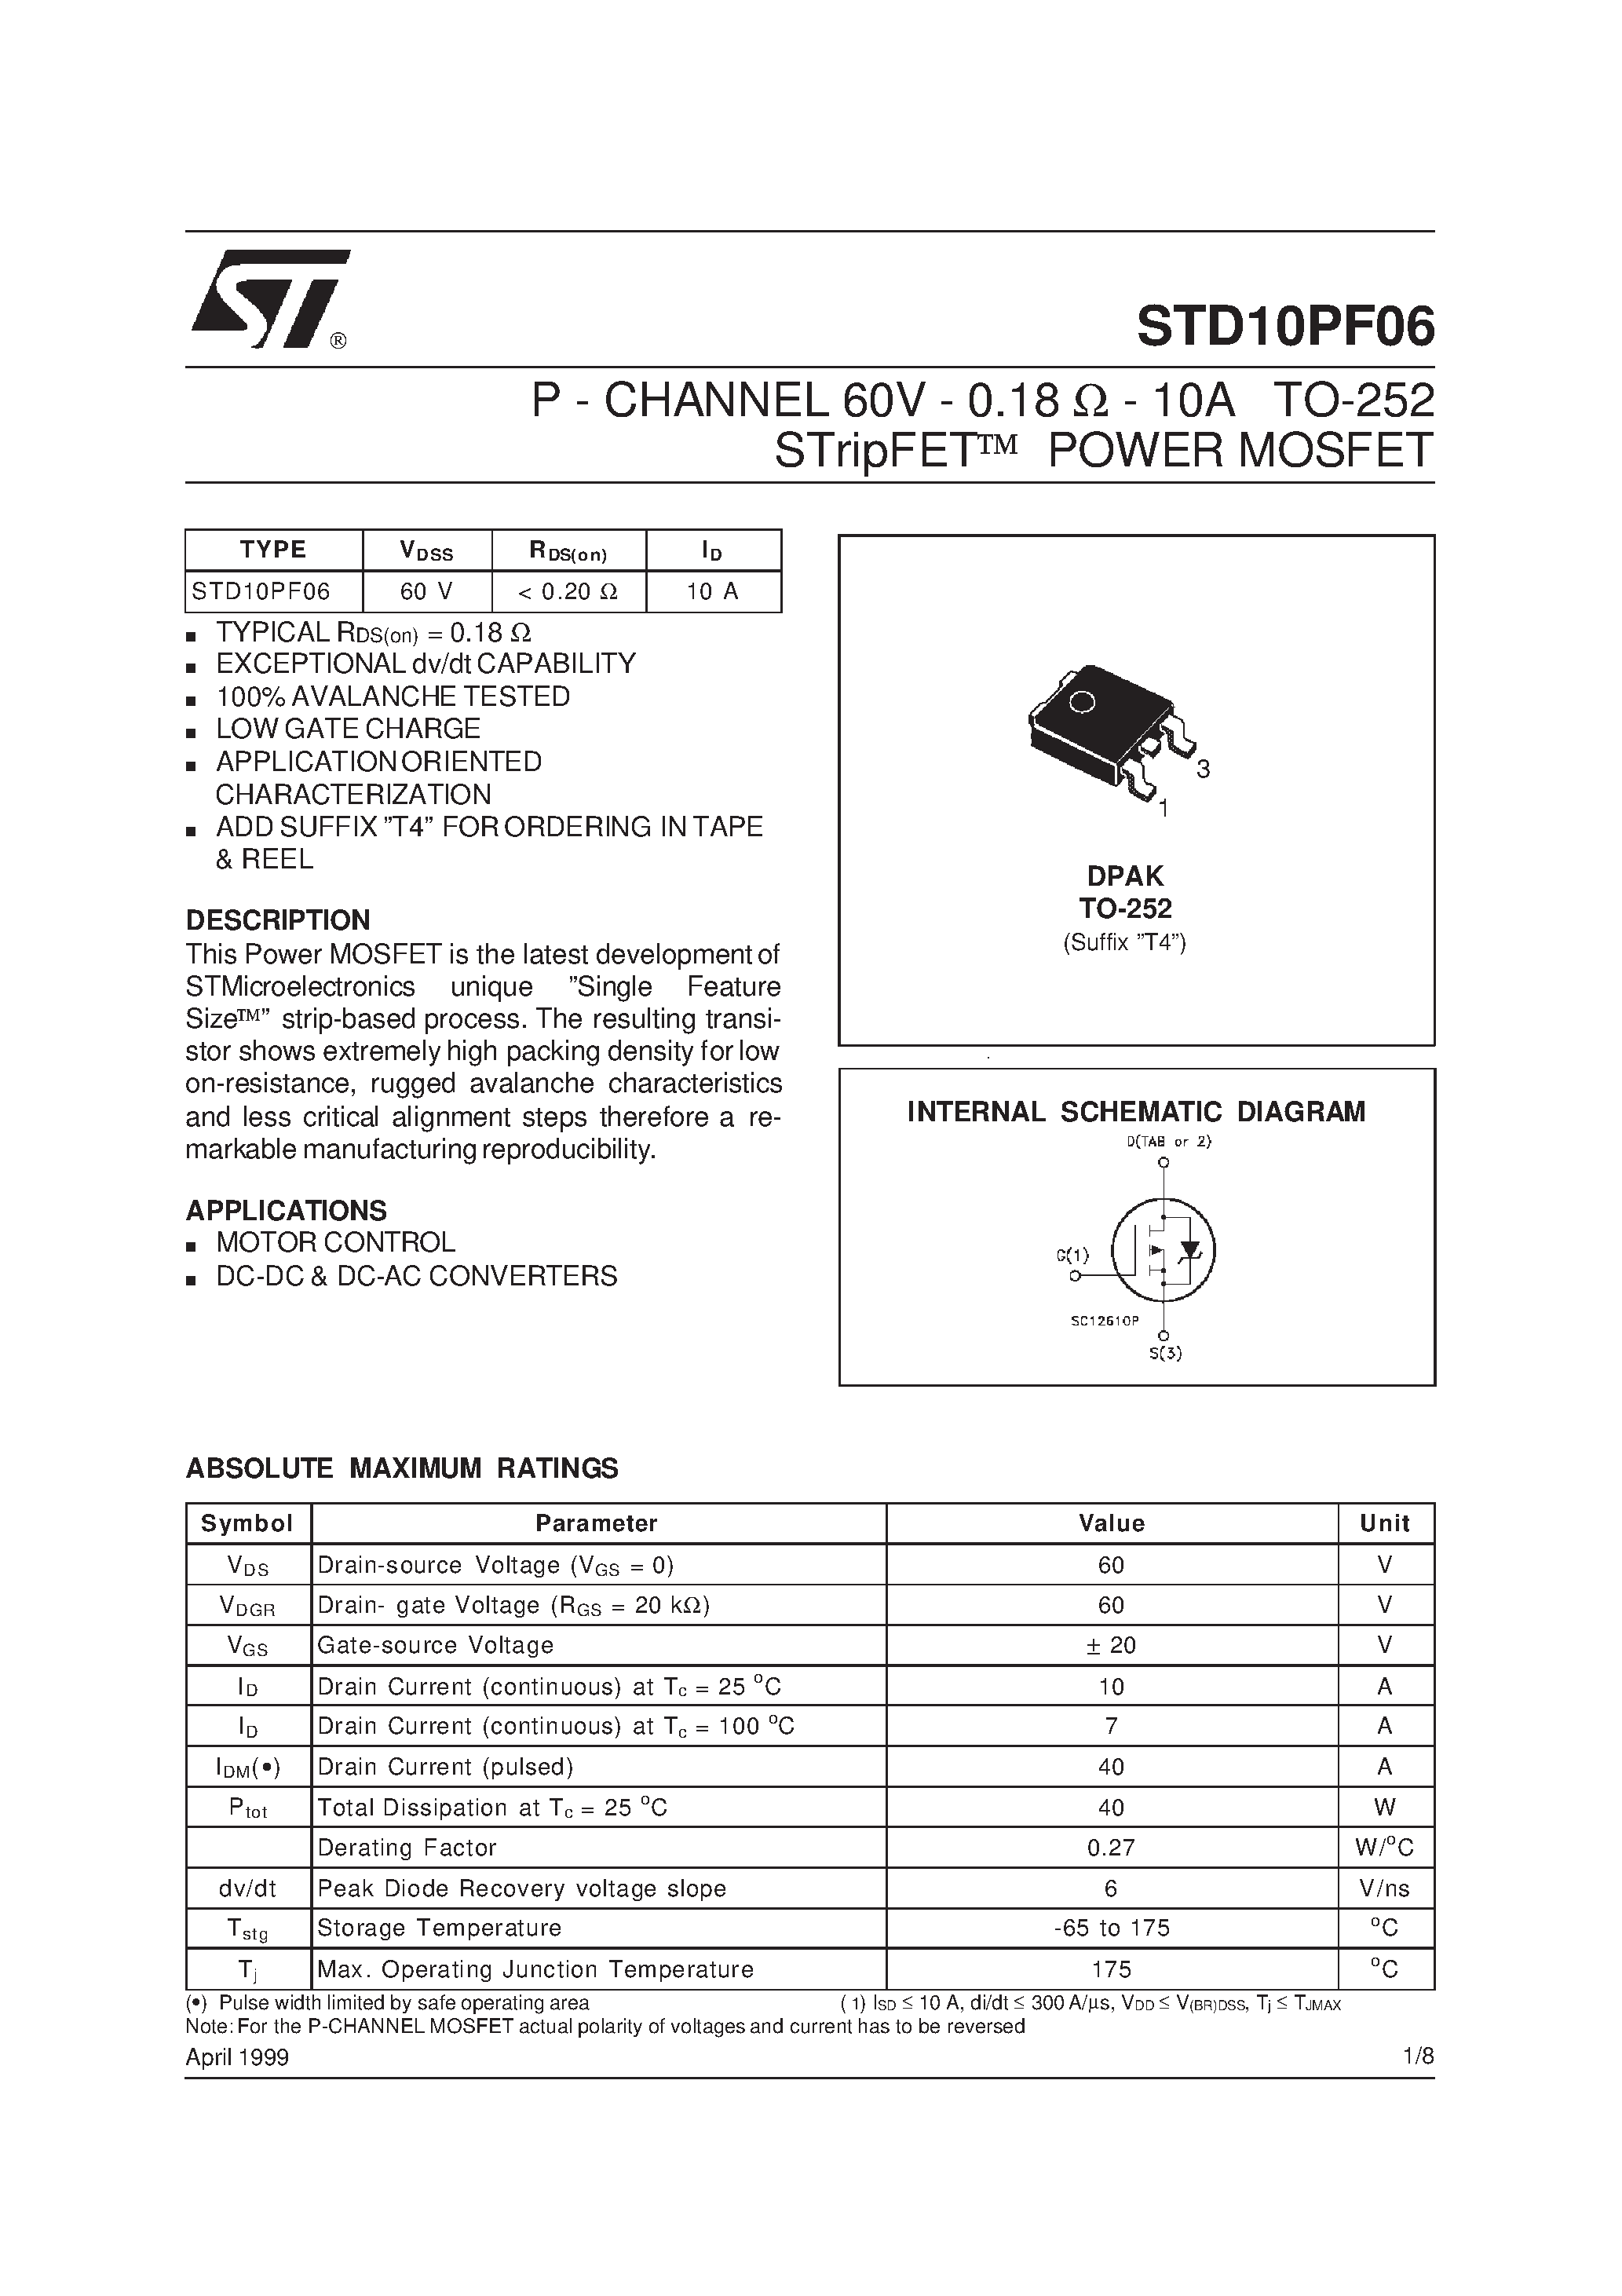 Datasheet STD10PF06 - N-CHANNEL POWER MOSFET page 1